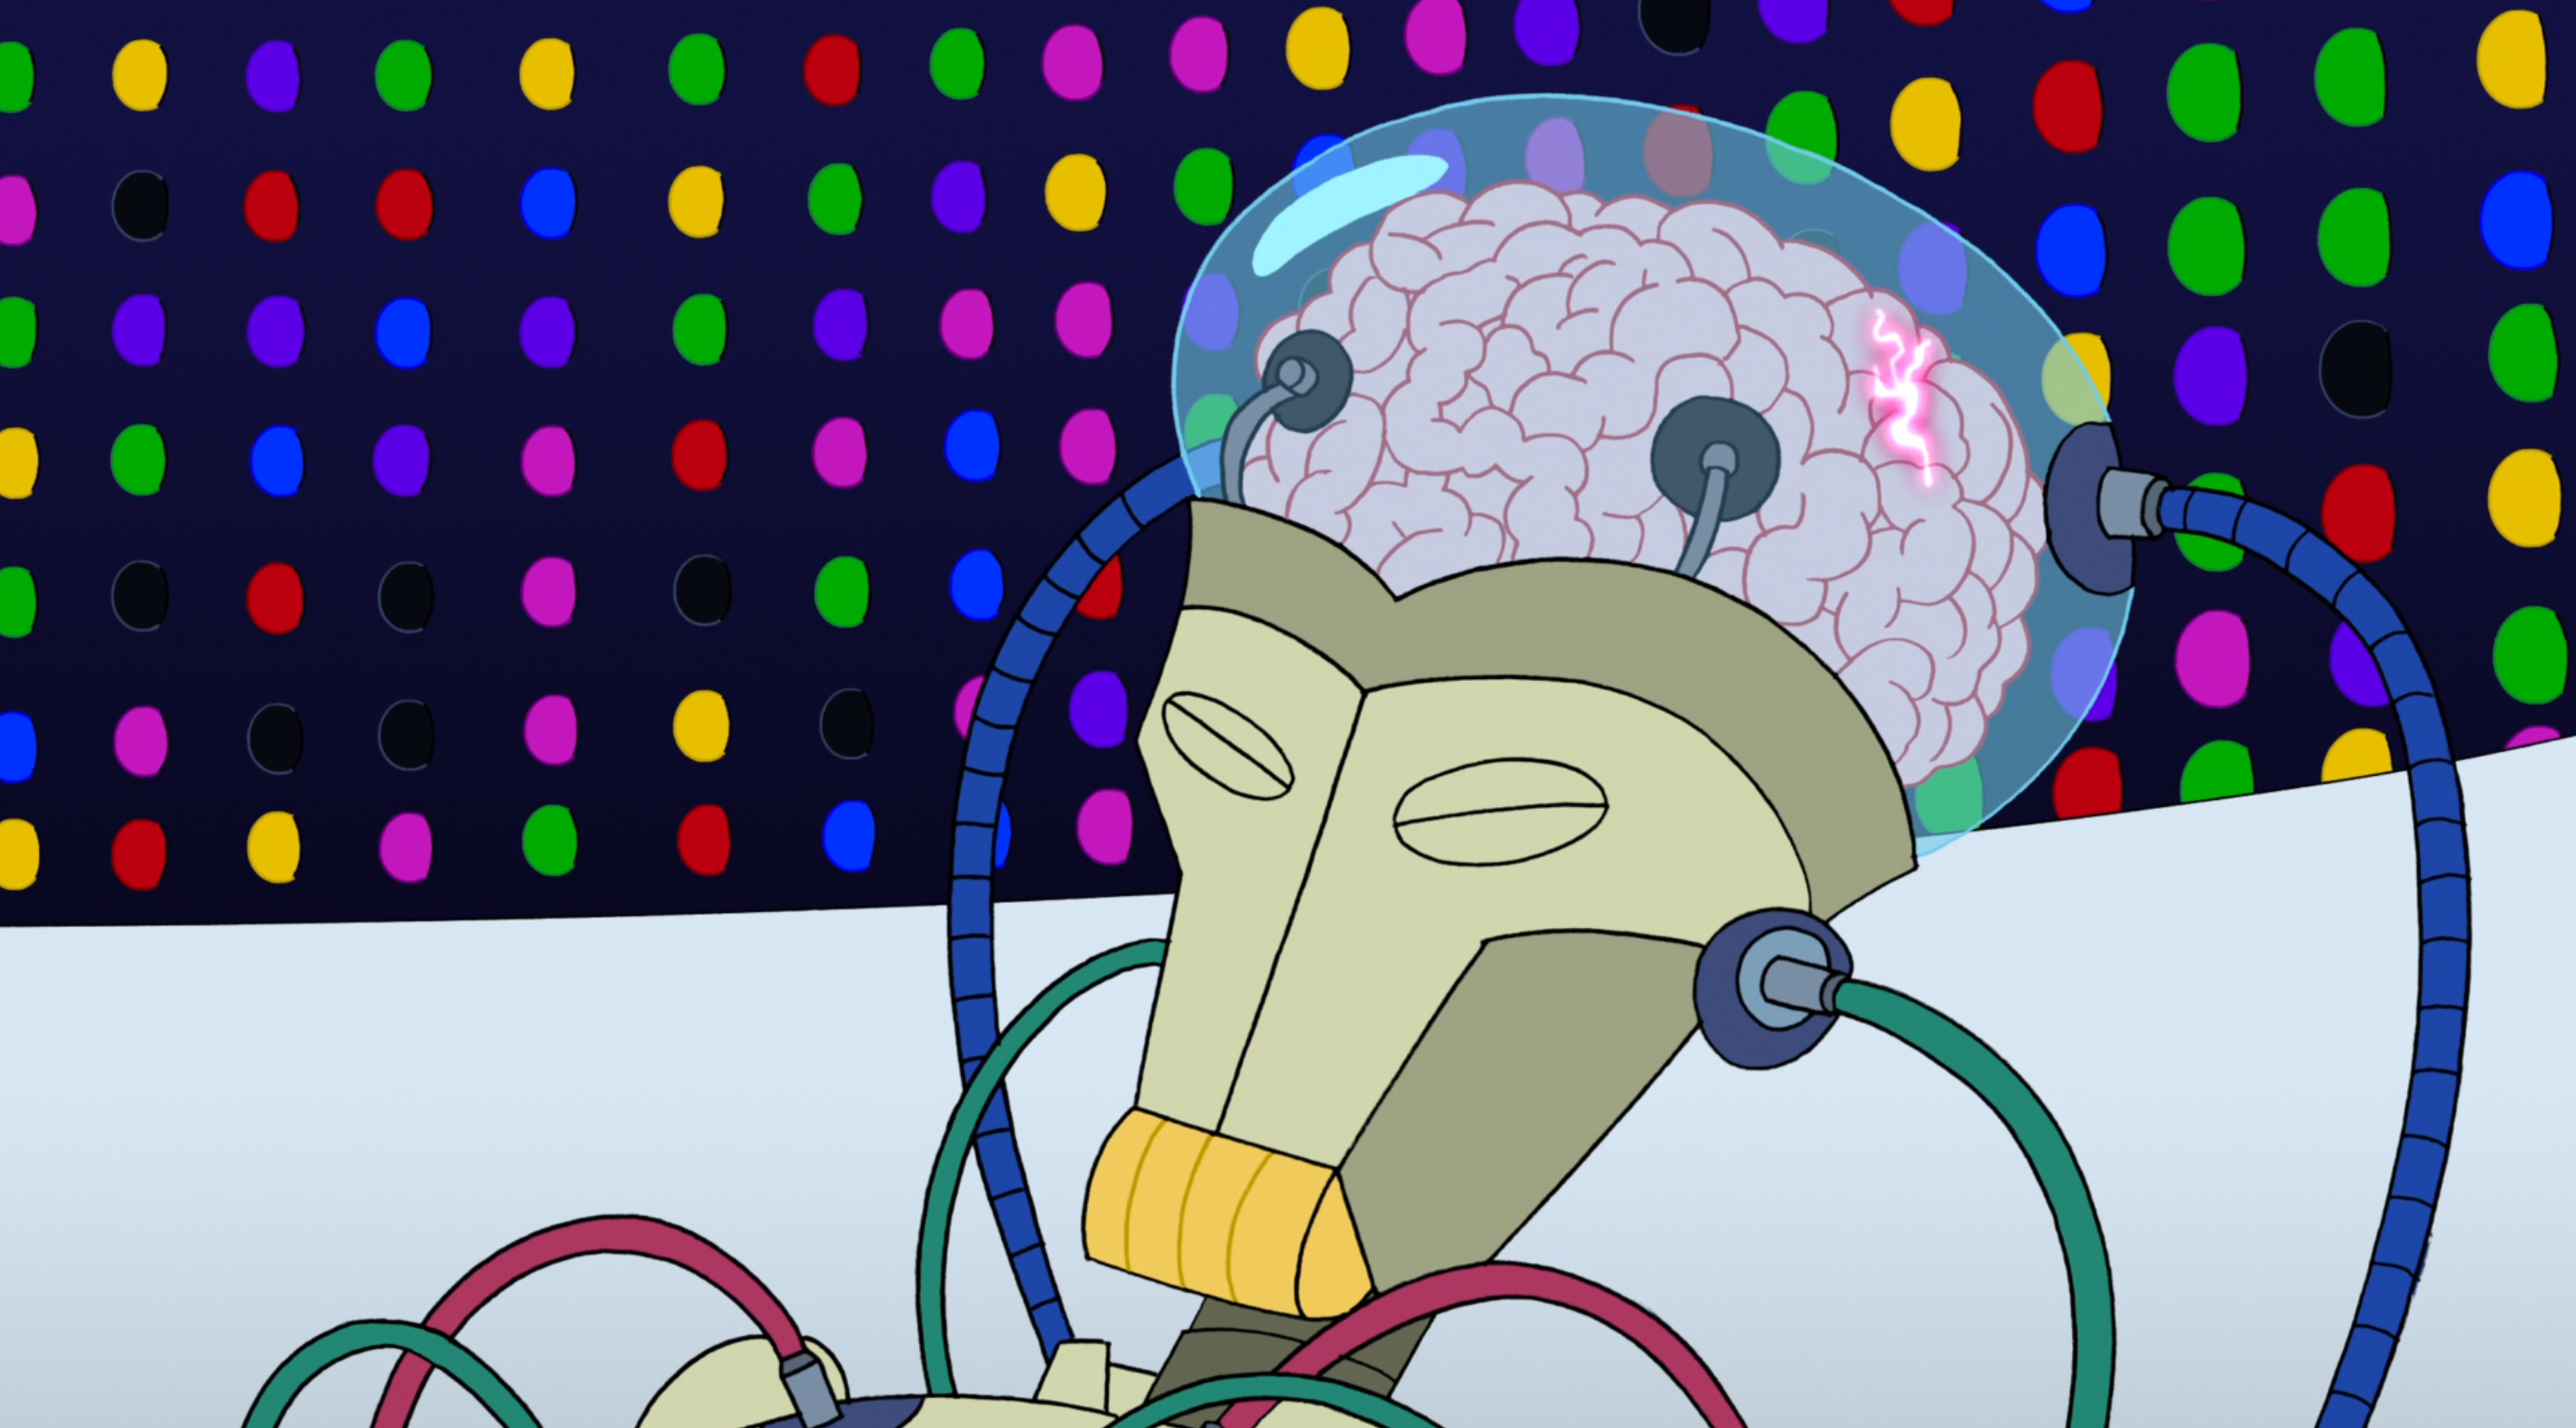 Futurama, S6 EP16 "Law and Oracle"